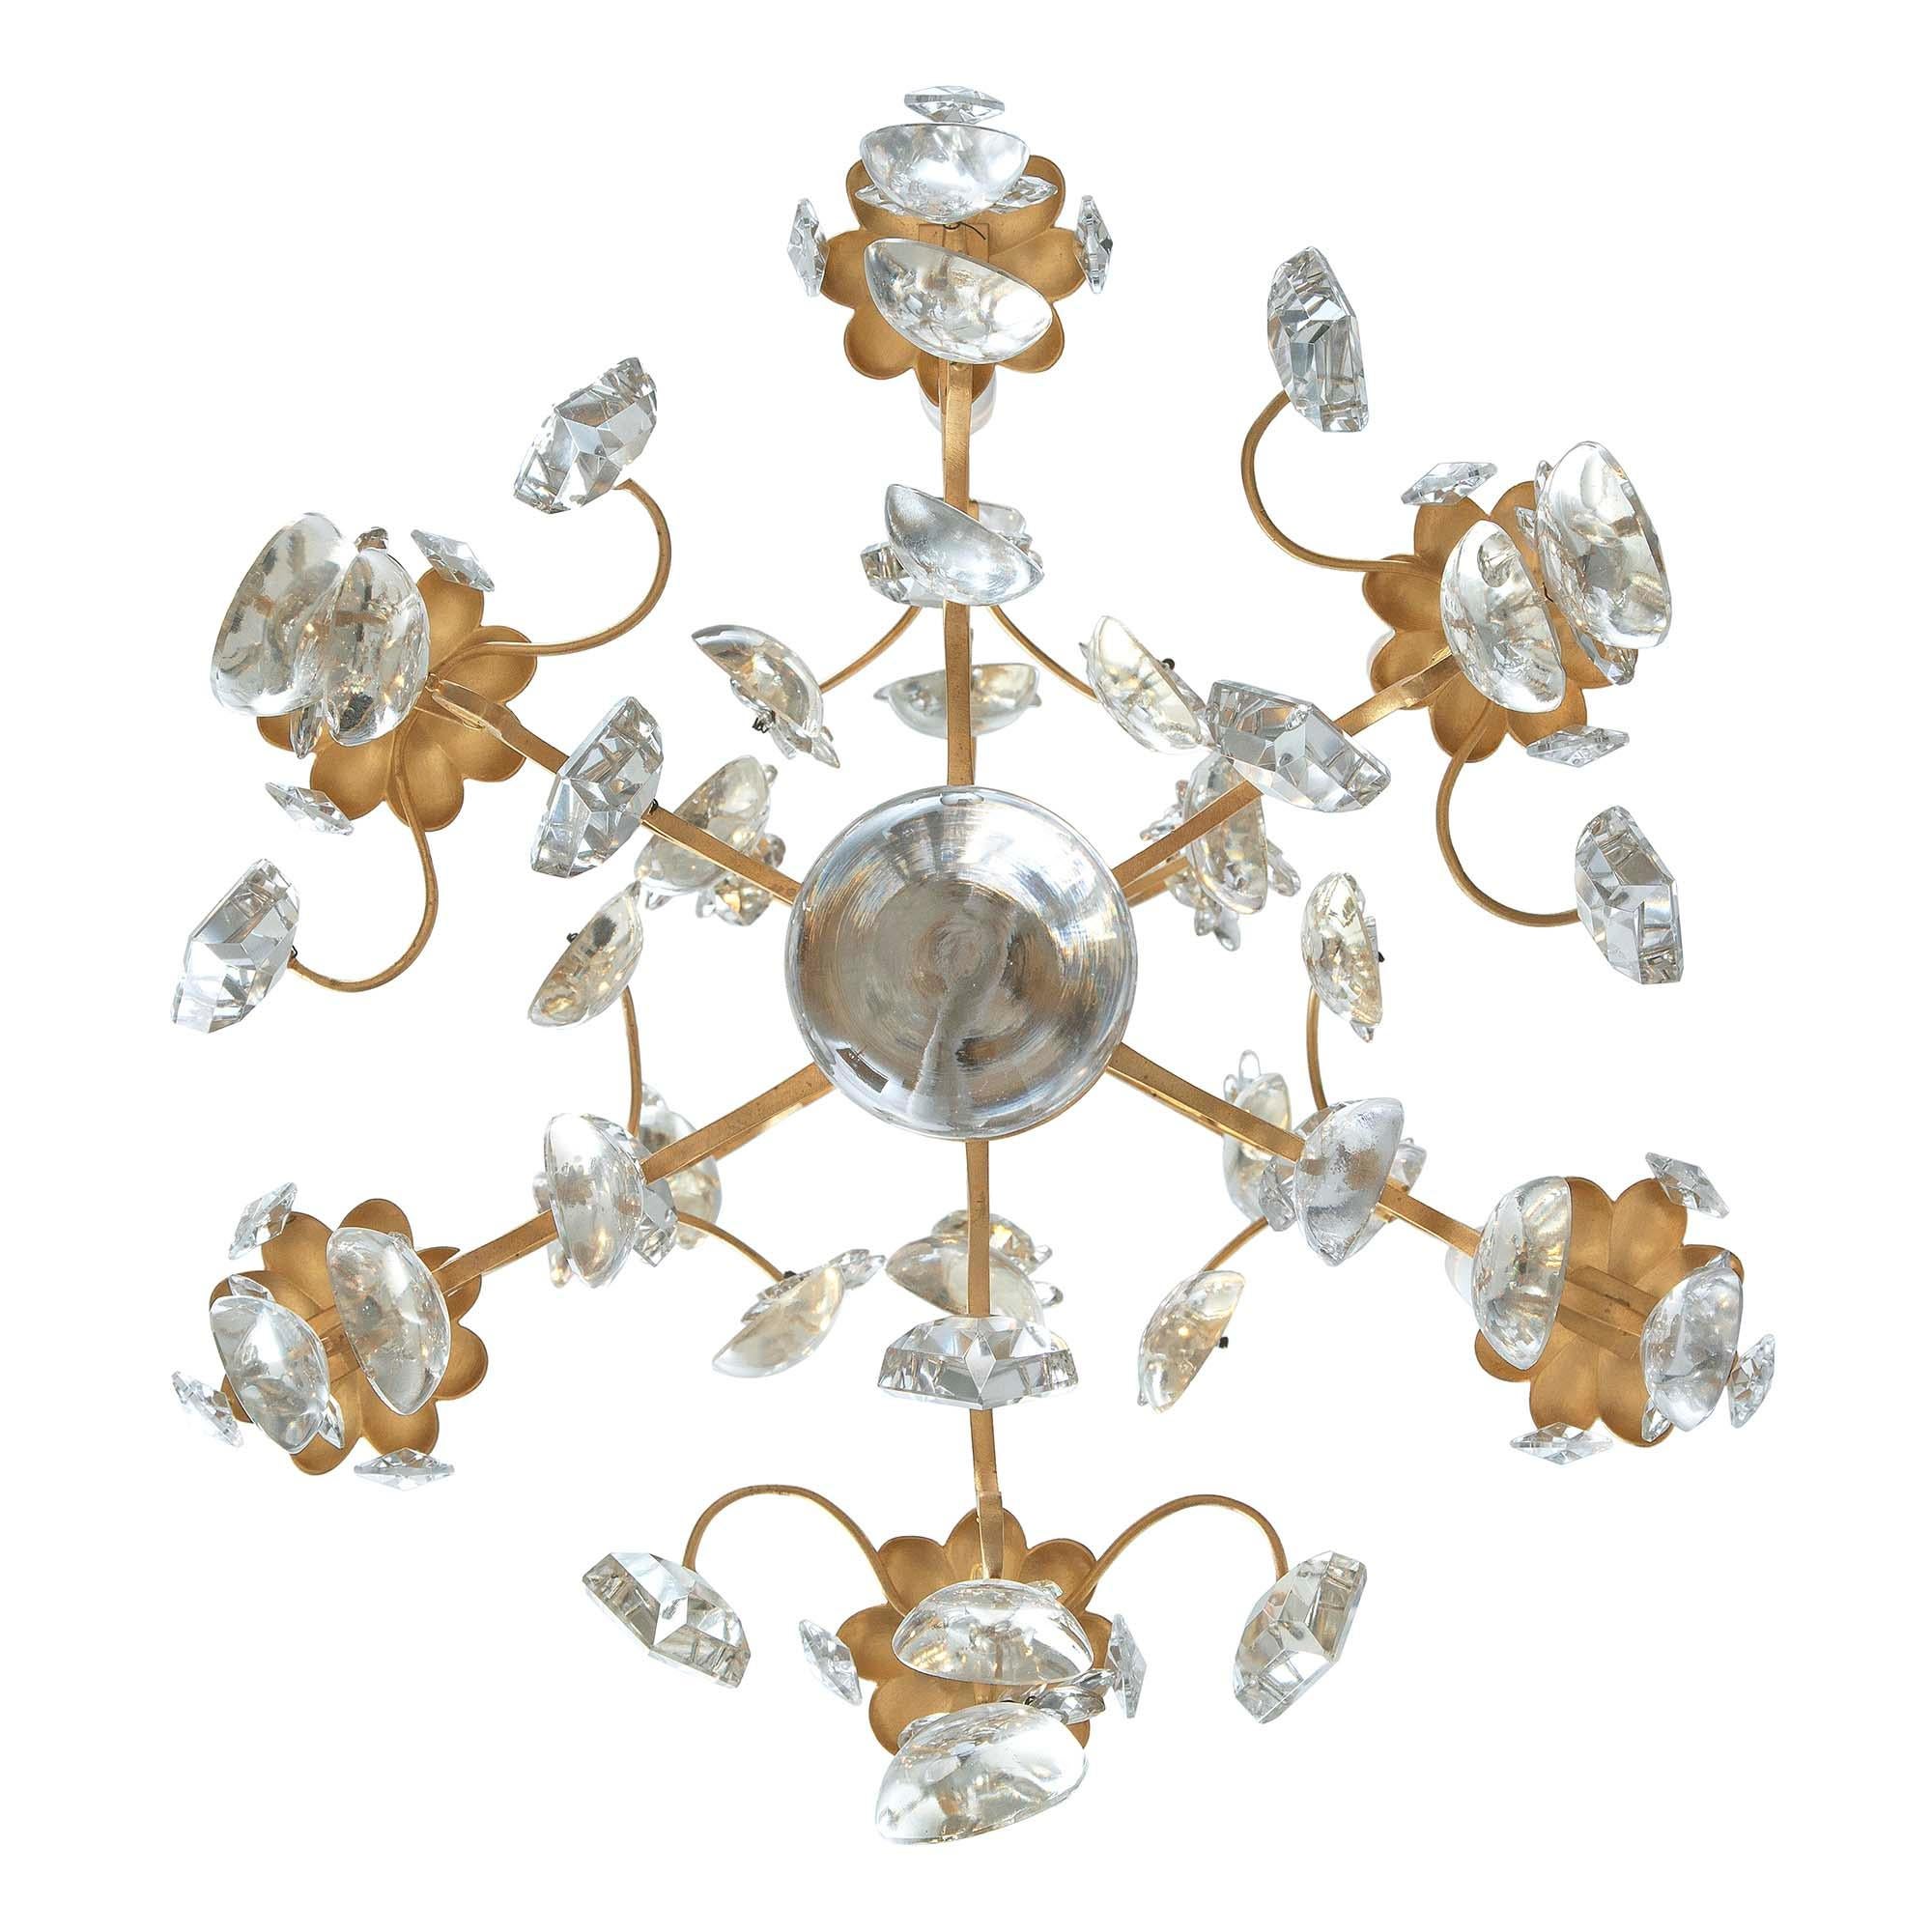 French Louis XV Style Baccarat Crystal and Ormolu Six-Light Chandelier For Sale 1